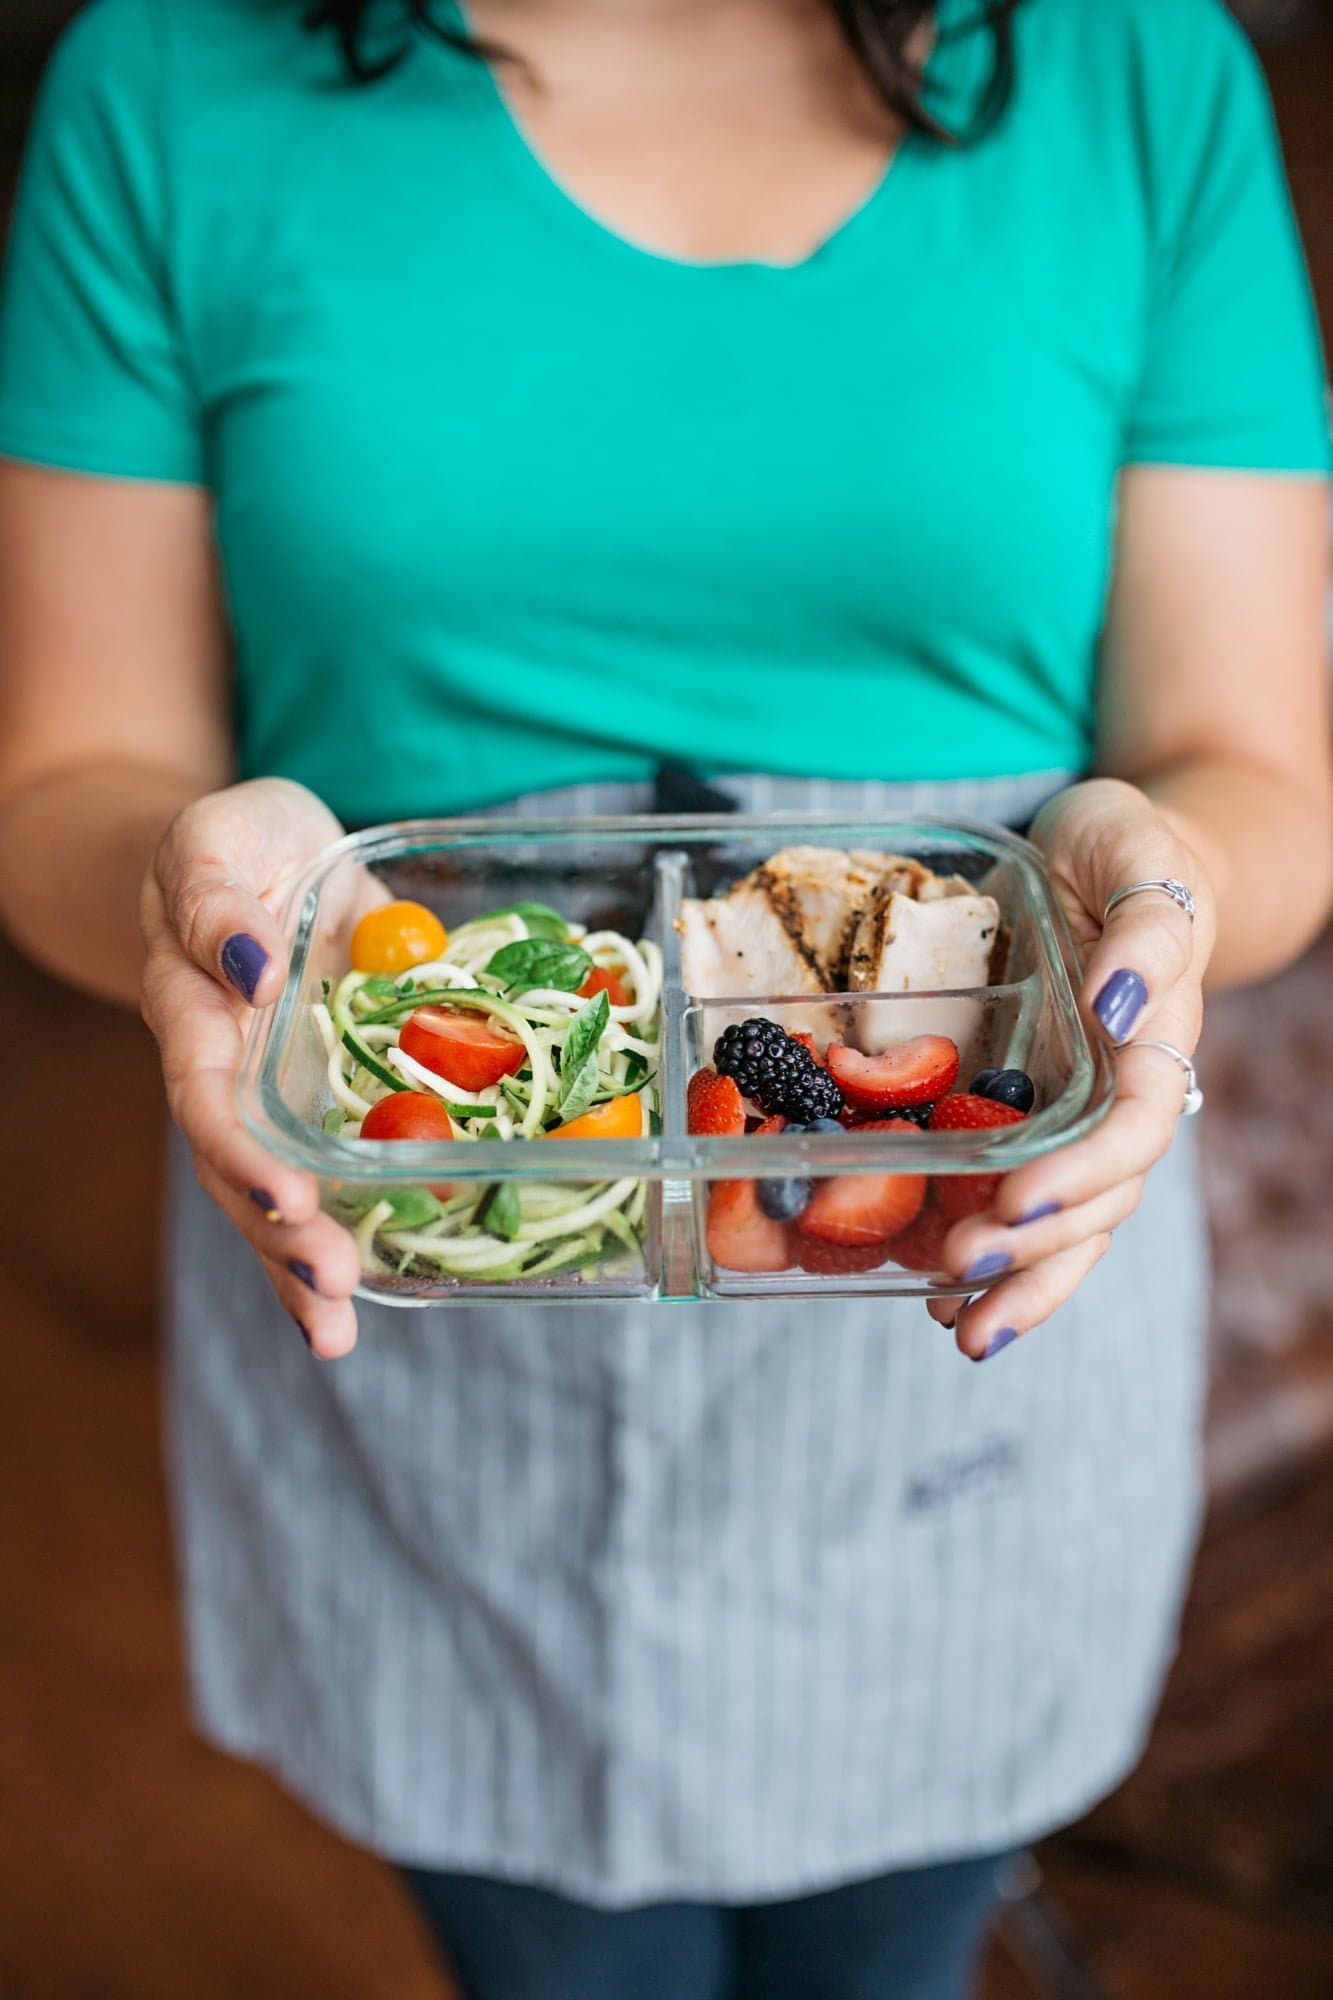 Close-up of a woman holding a divided glass container filled with a prepped meal.